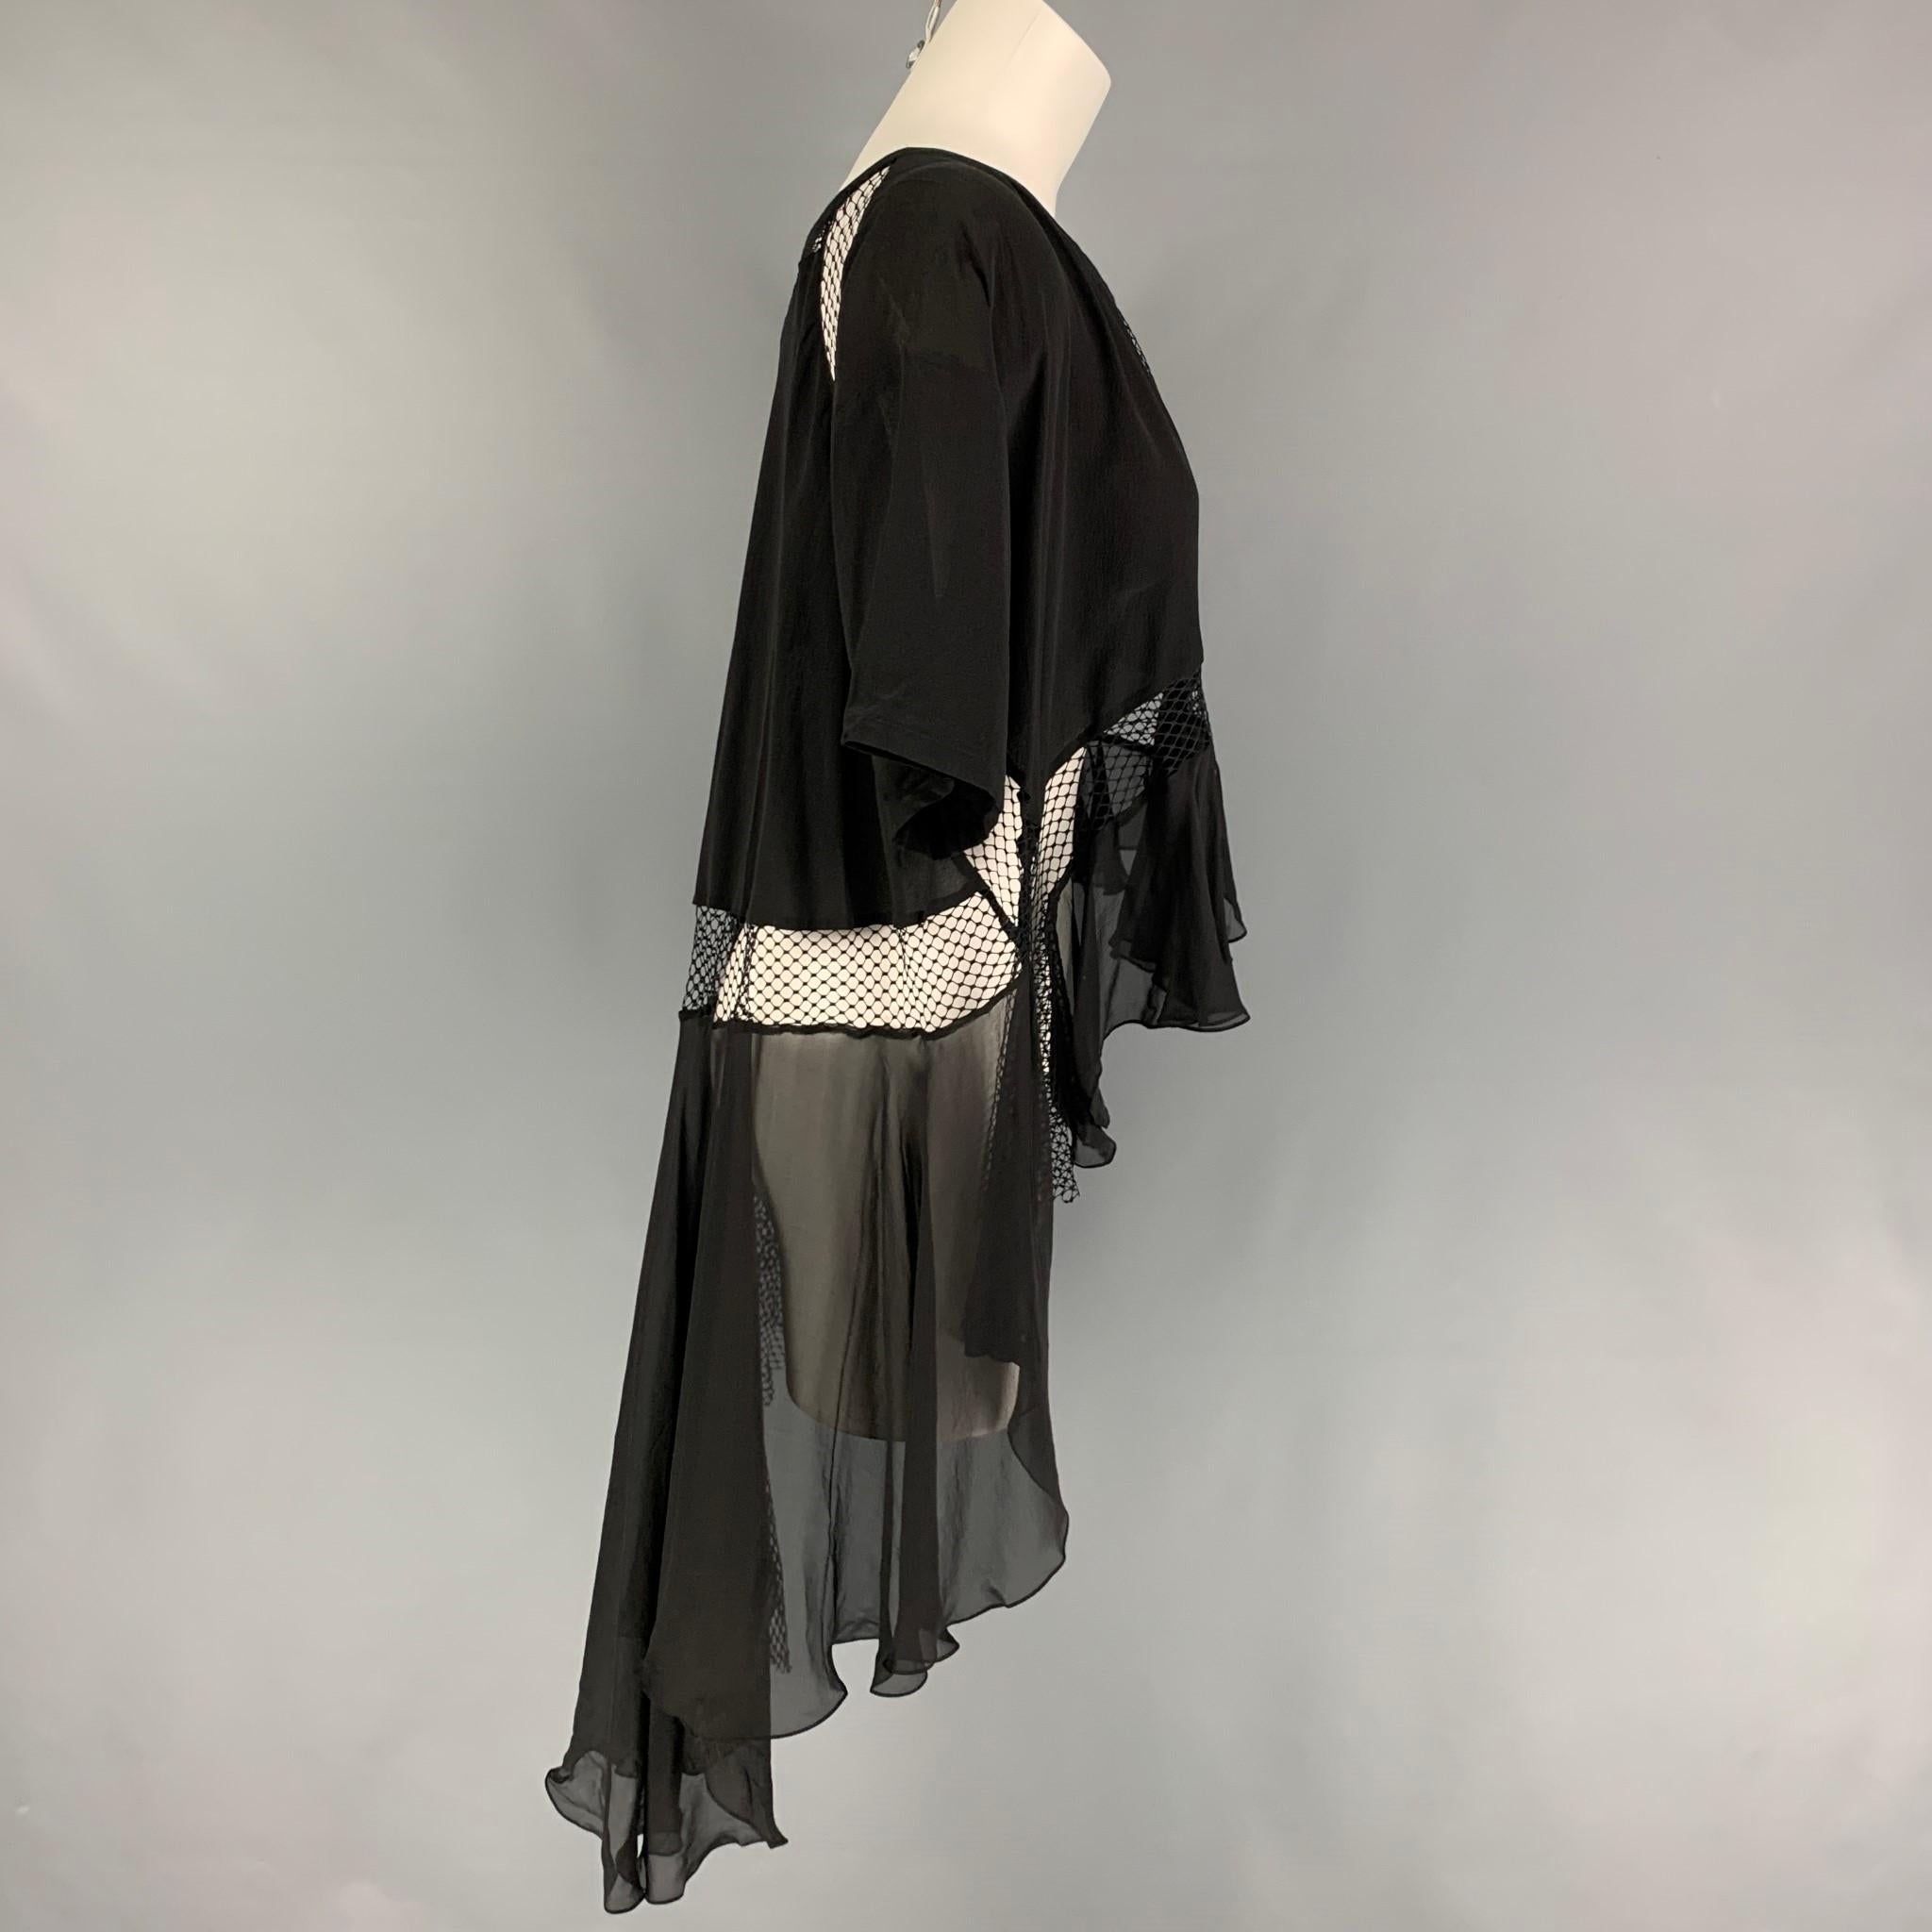 FAITH CONNEXION dress top comes in a black silk featuring a asymmetrical style, loose fit, mesh panel, ruffled, long, short sleeves, and a loose neckline. Made in Italy.

New With Tags. 
Marked: XS
Original Retail Price: